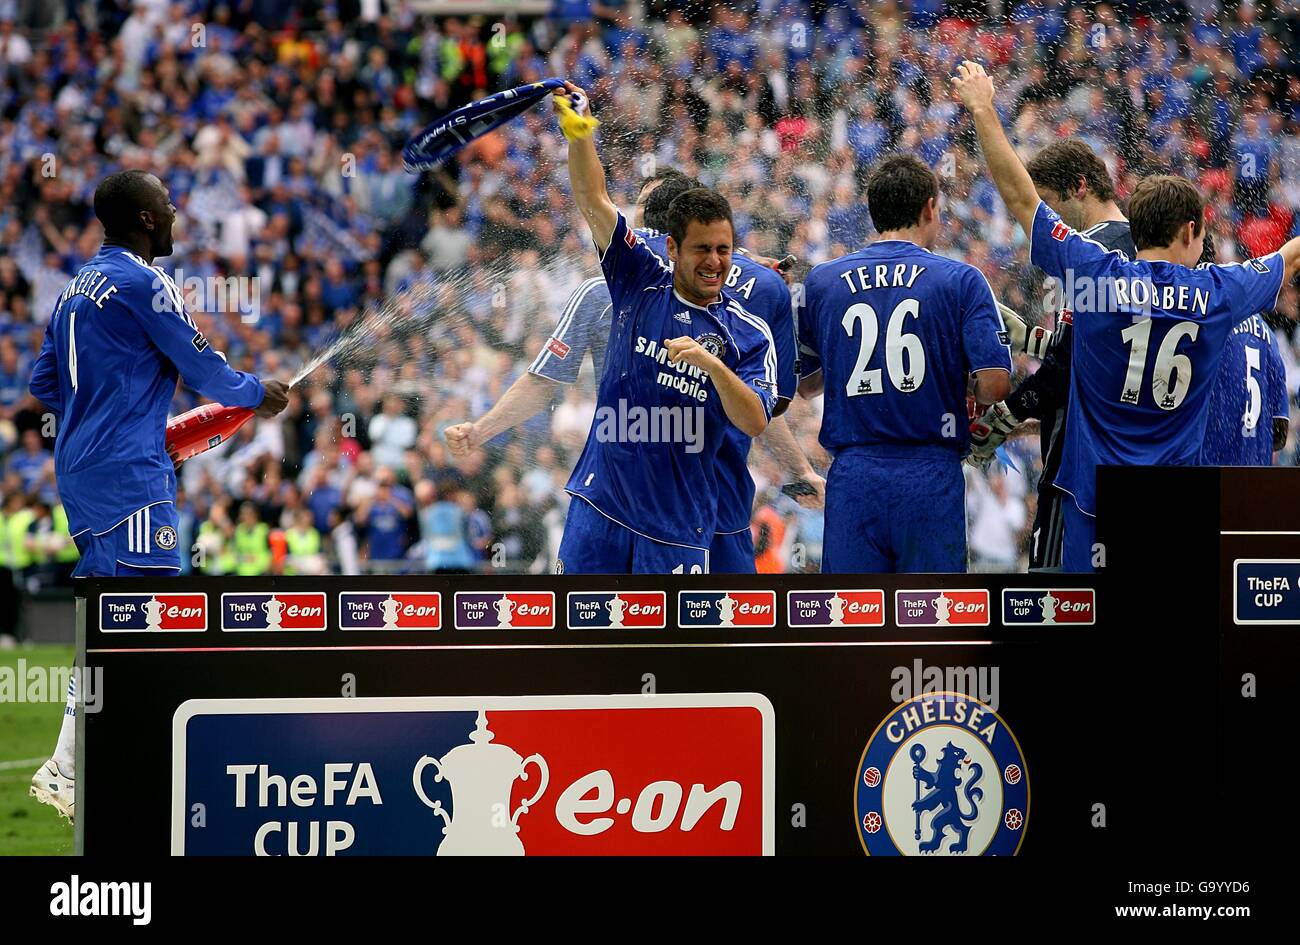 Soccer - FA Cup - Final - Chelsea v Manchester United - Wembley Stadium. Chelsea's Joe Cole, Claude Makelele, John Terry and Arjen Robben celebrate victory Stock Photo